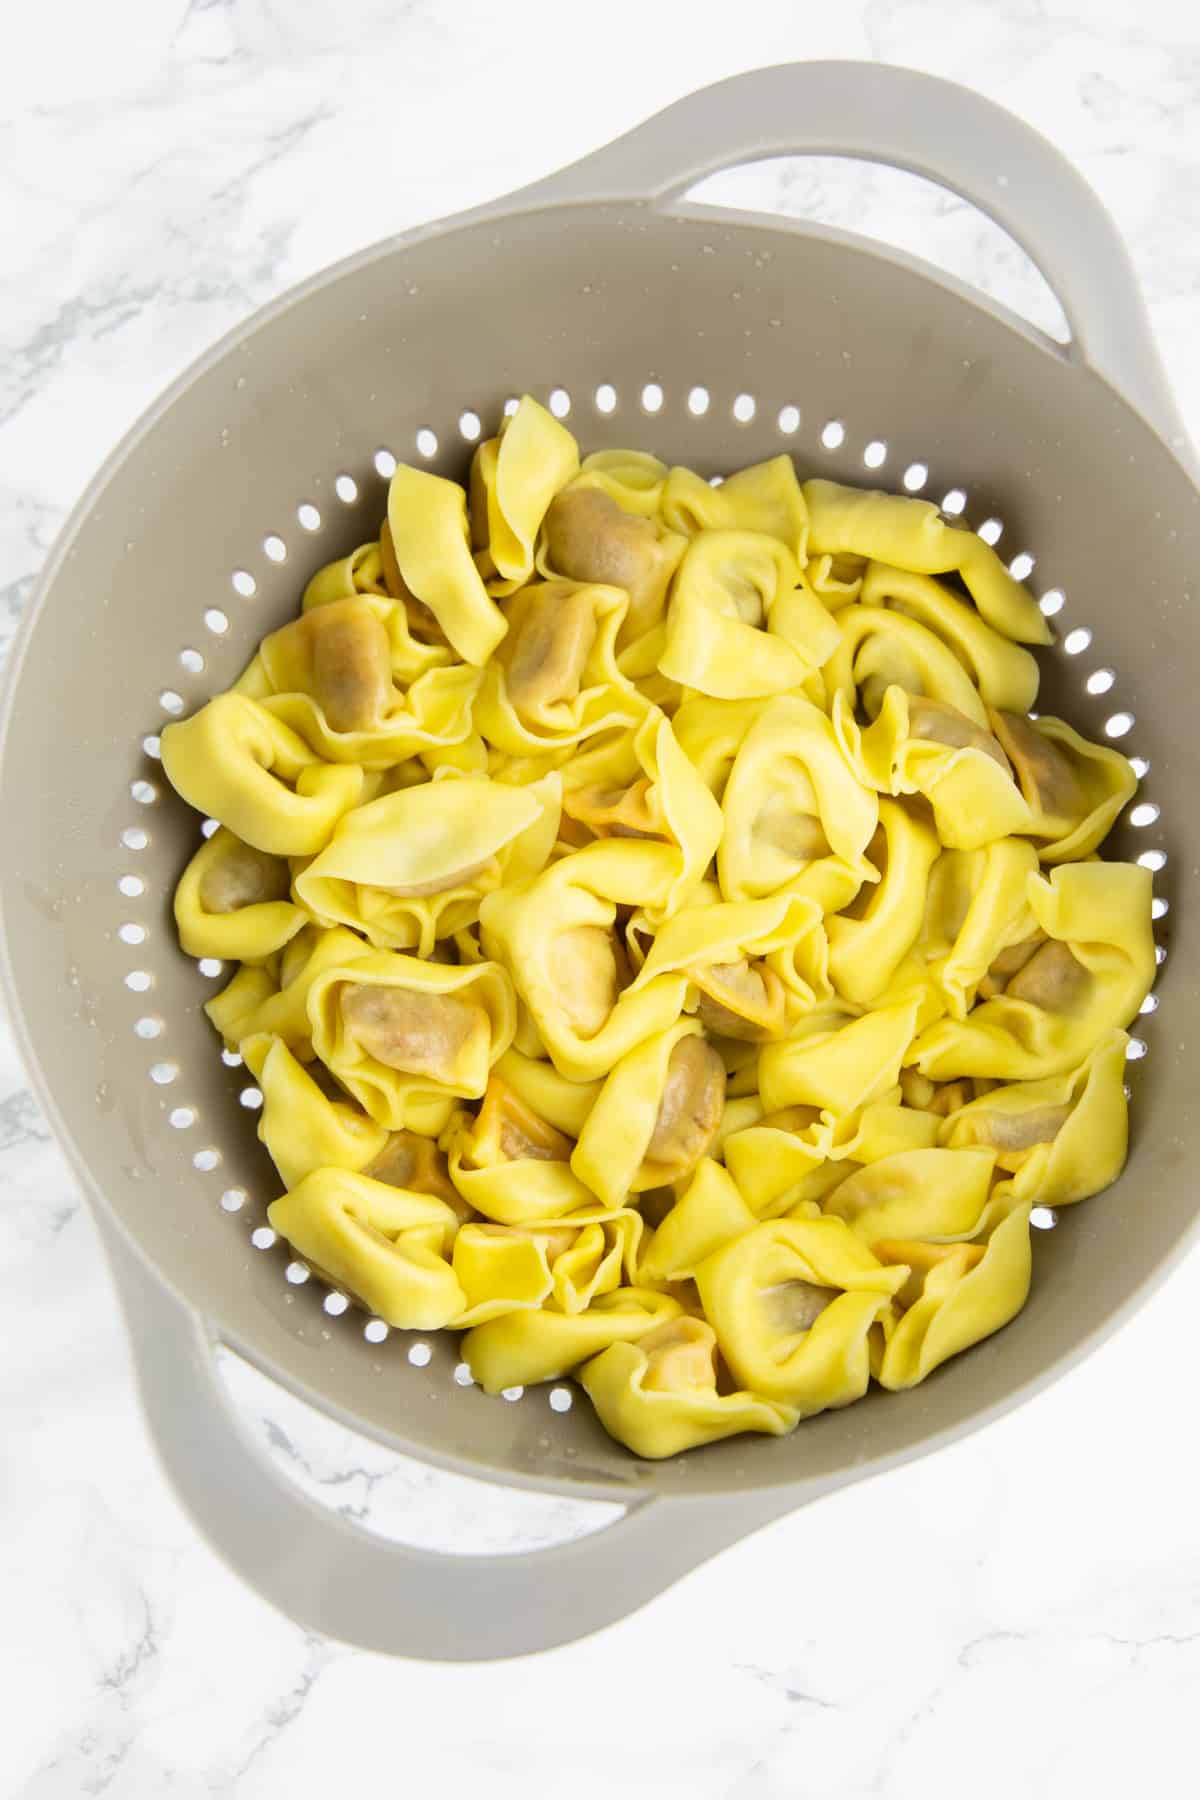 cooked tortellini in a grey colander on a marble countertop 